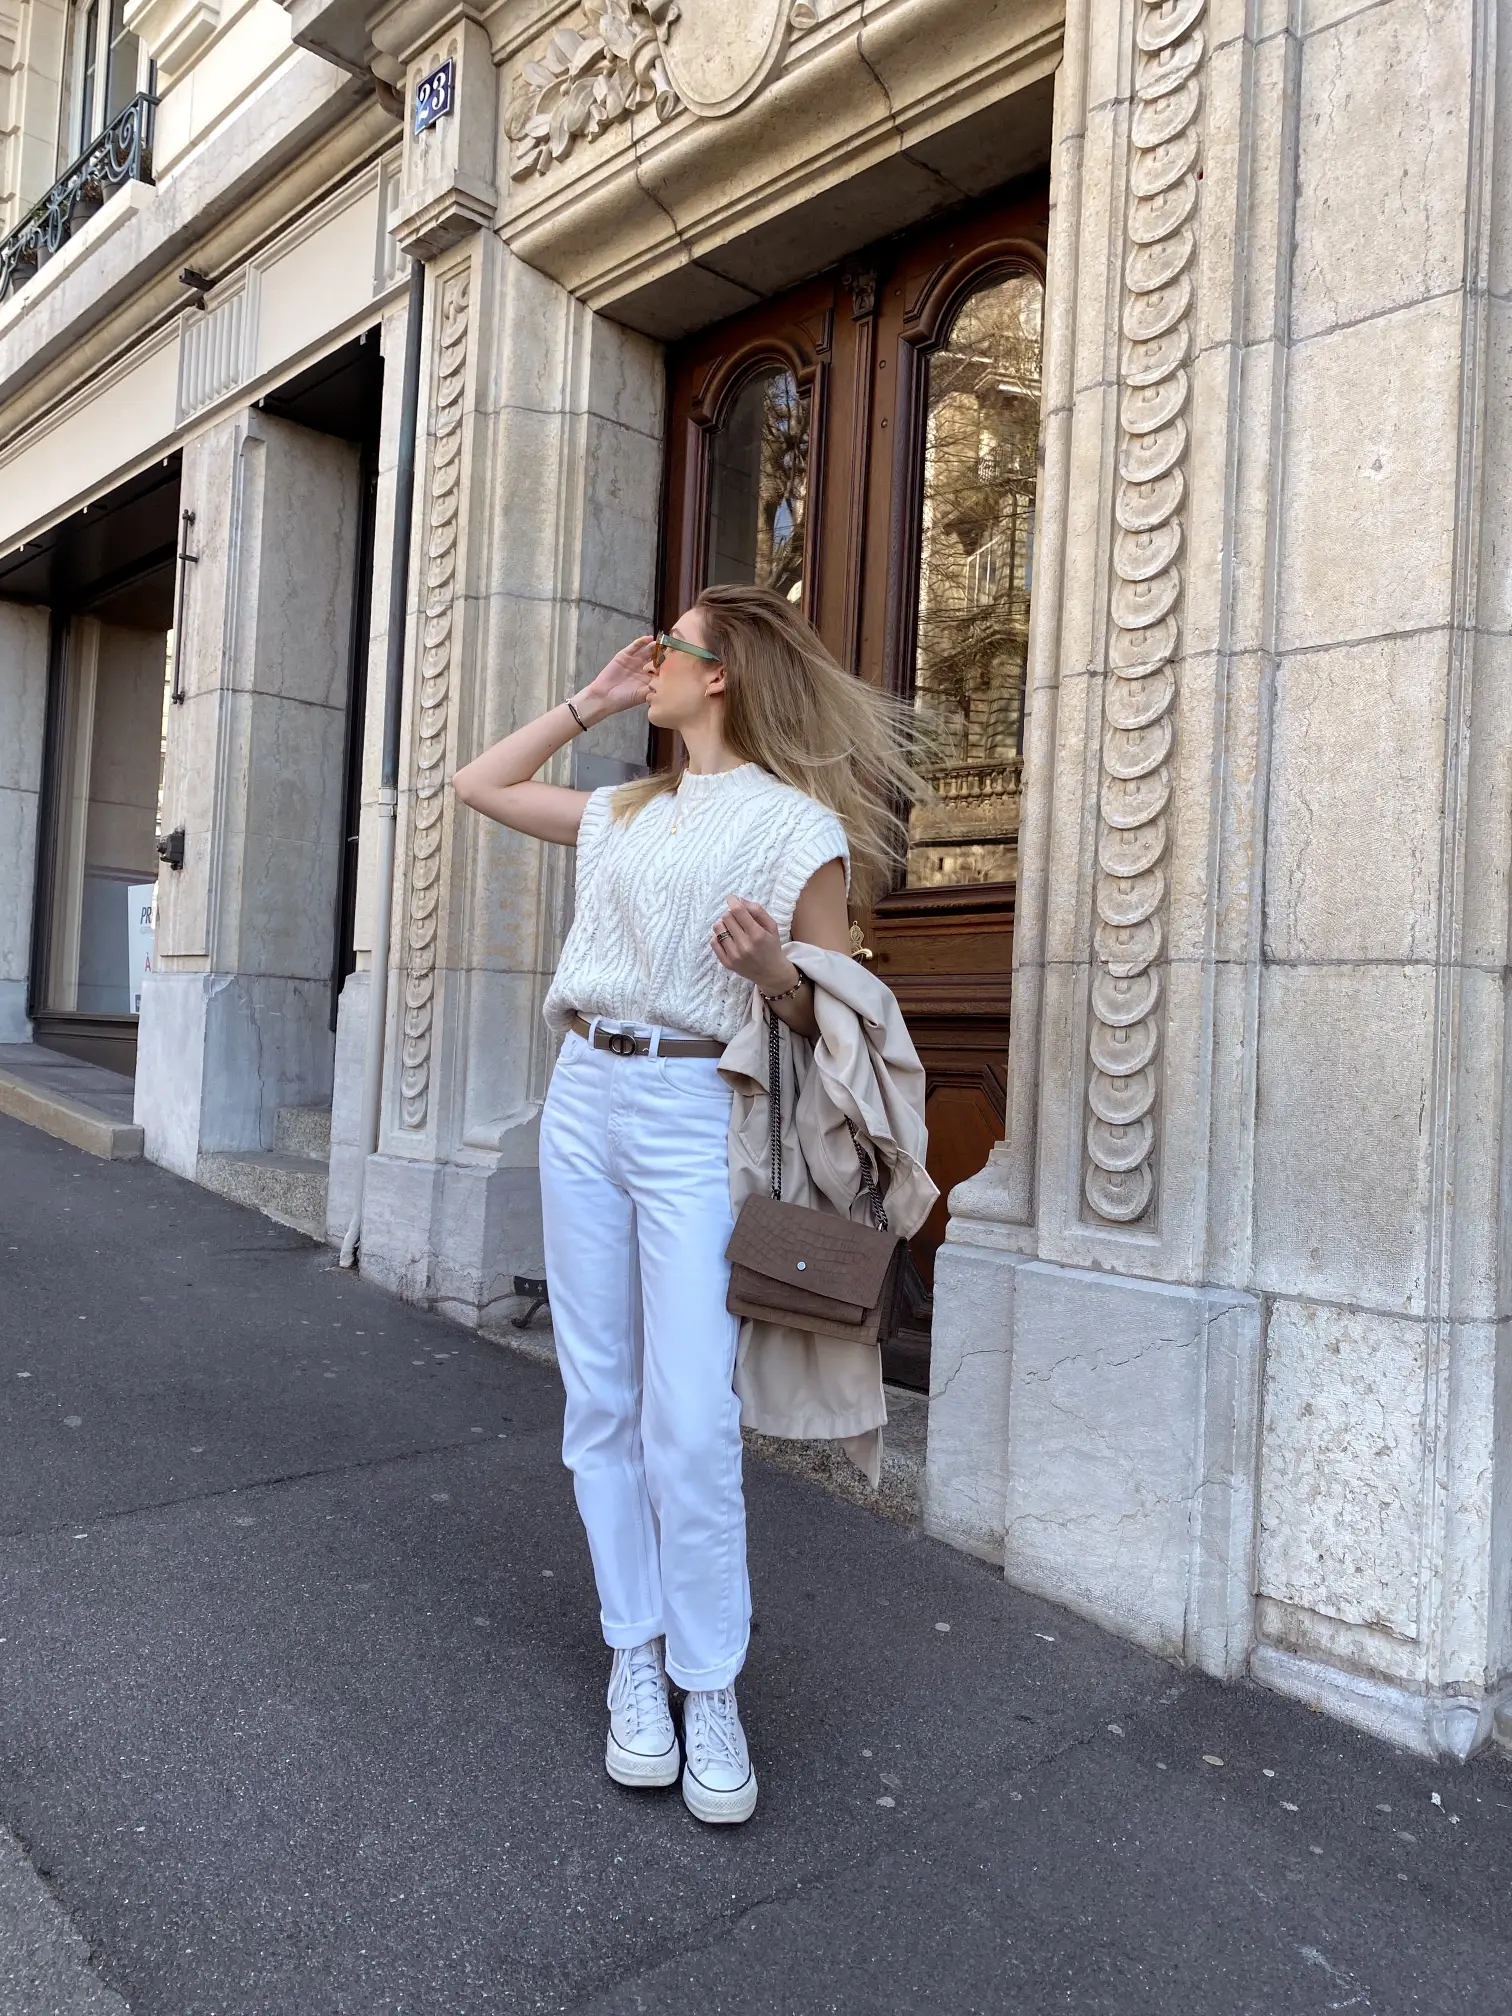 6 white jeans outfit ideas, Gallery posted by Pauline Matter